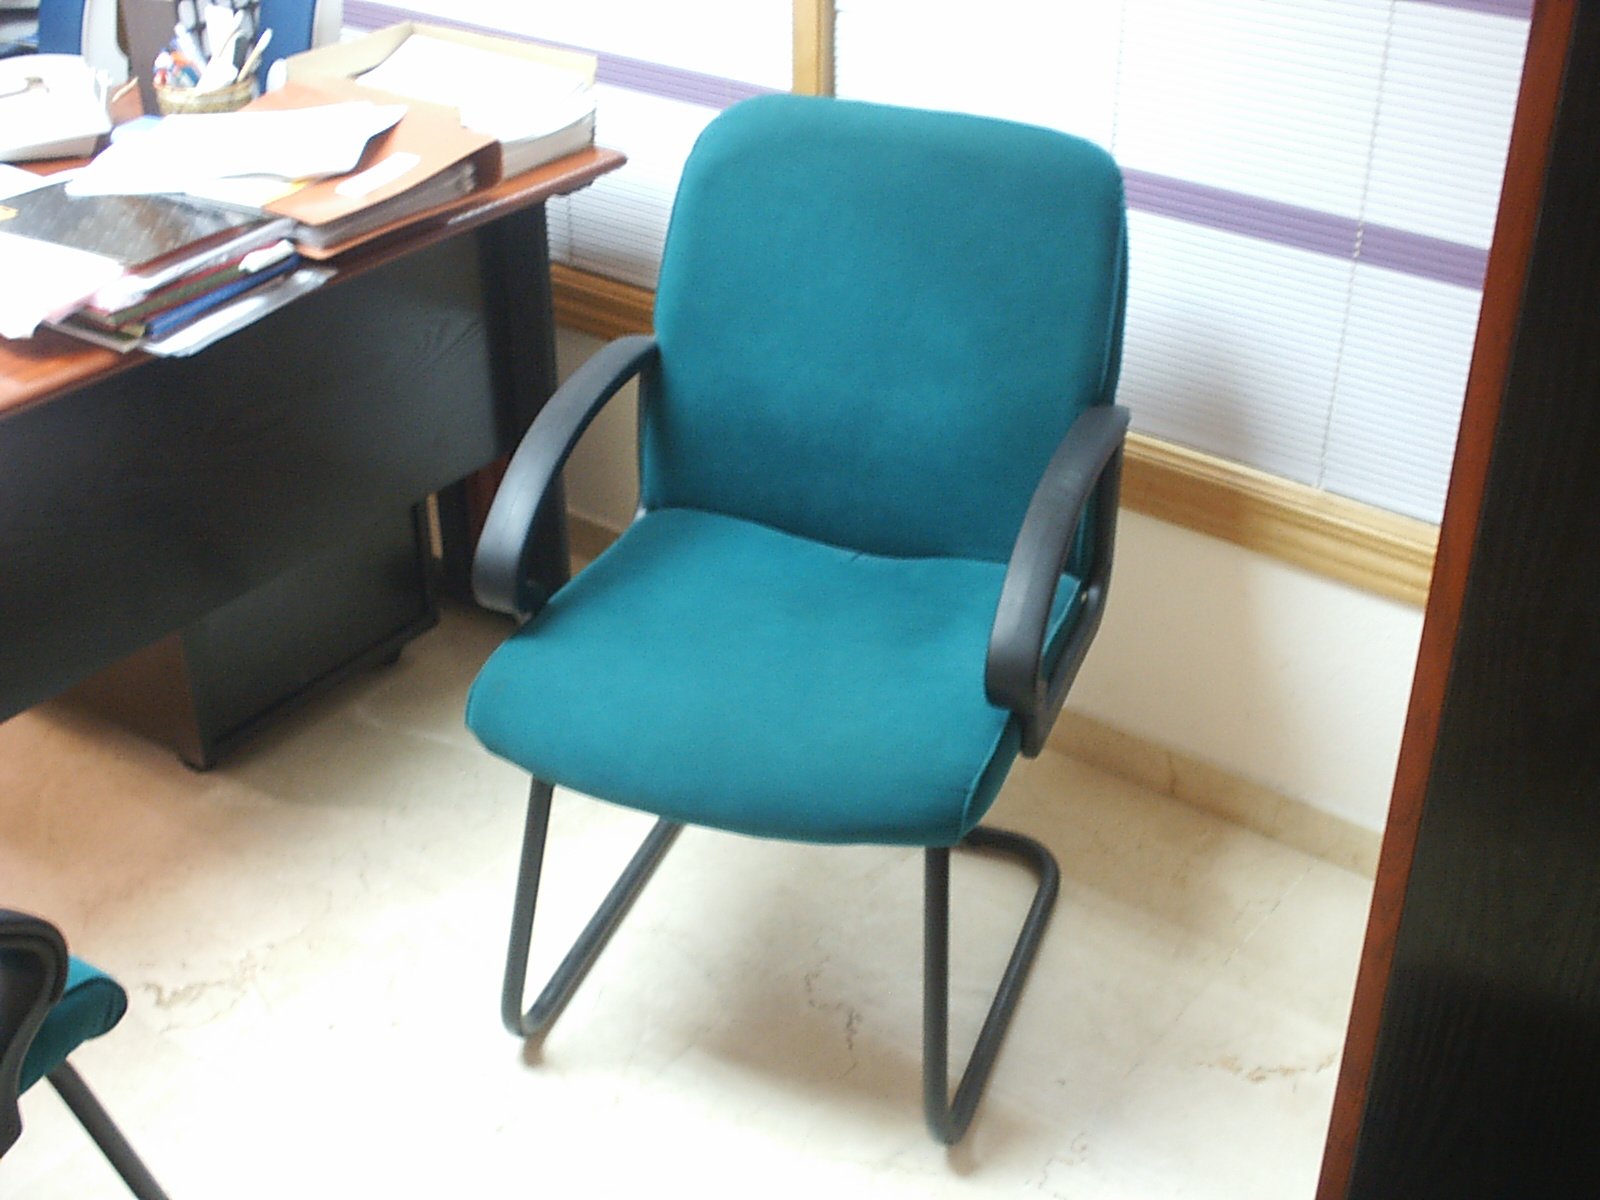 the blue office chair is next to the desk